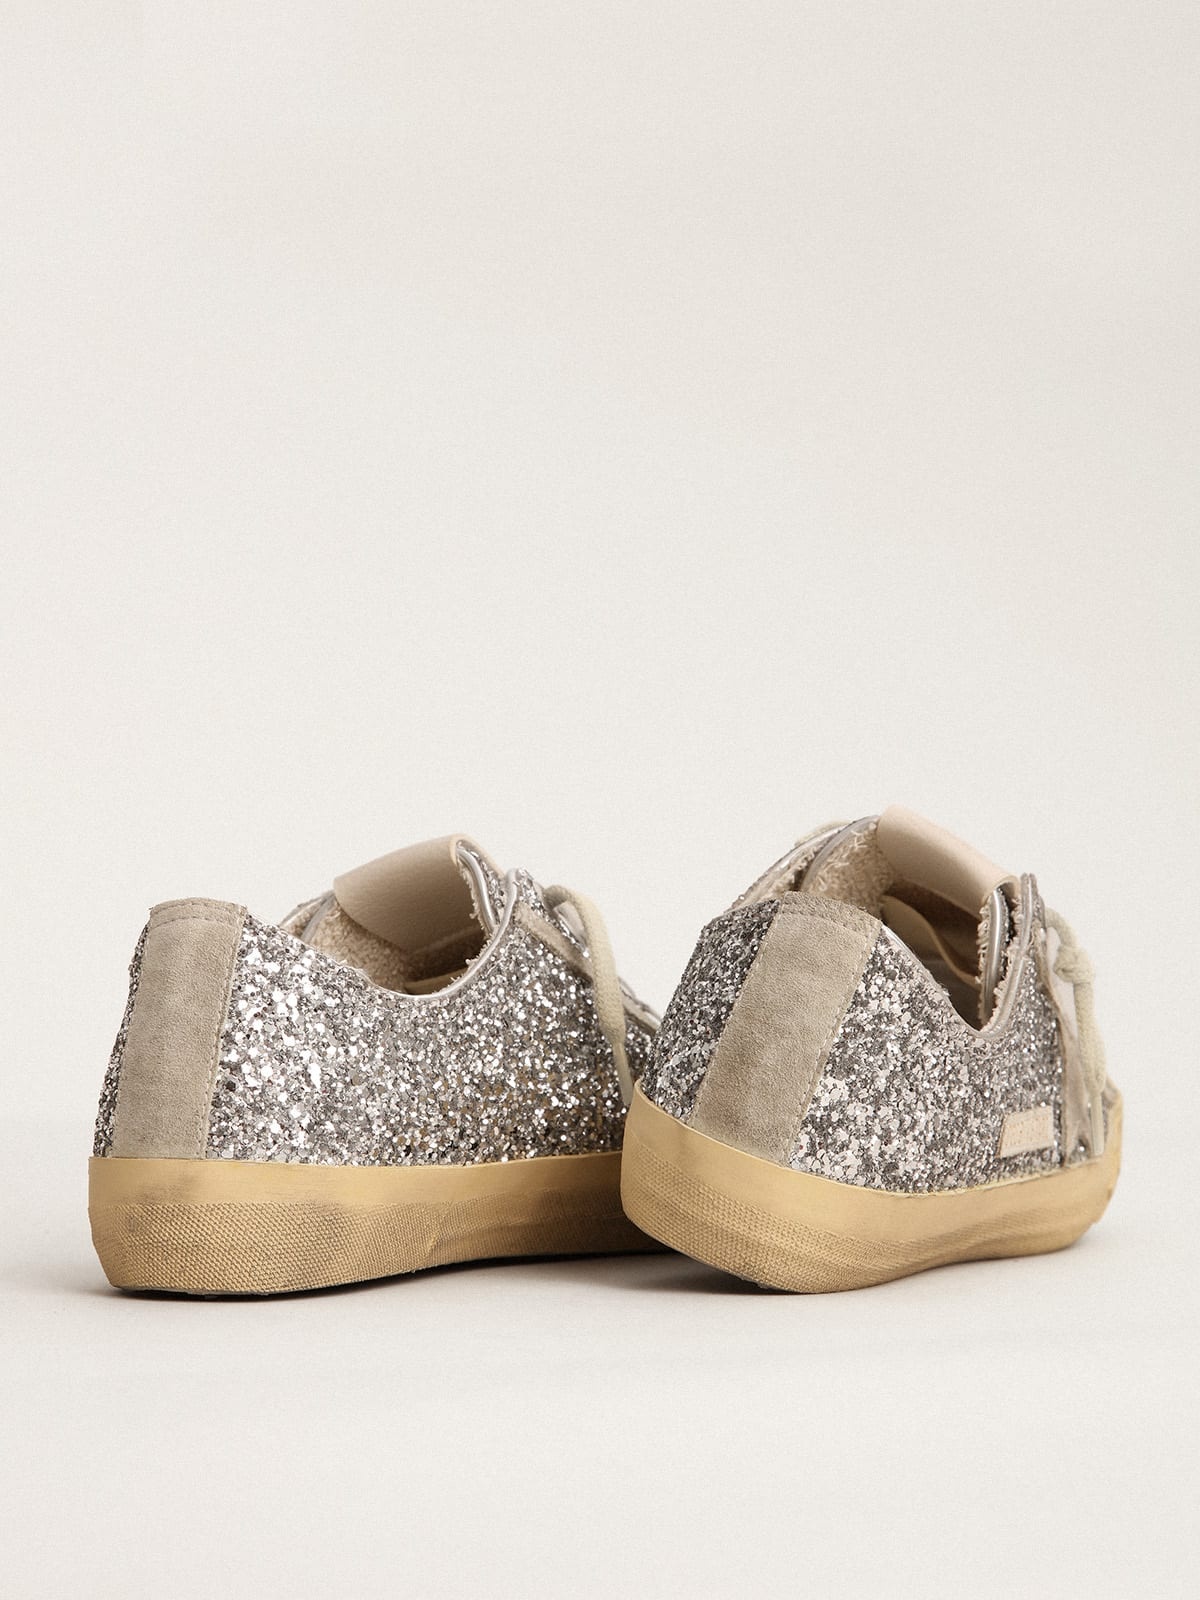 V-Star LTD sneakers in silver glitter with ice-gray suede star - 5